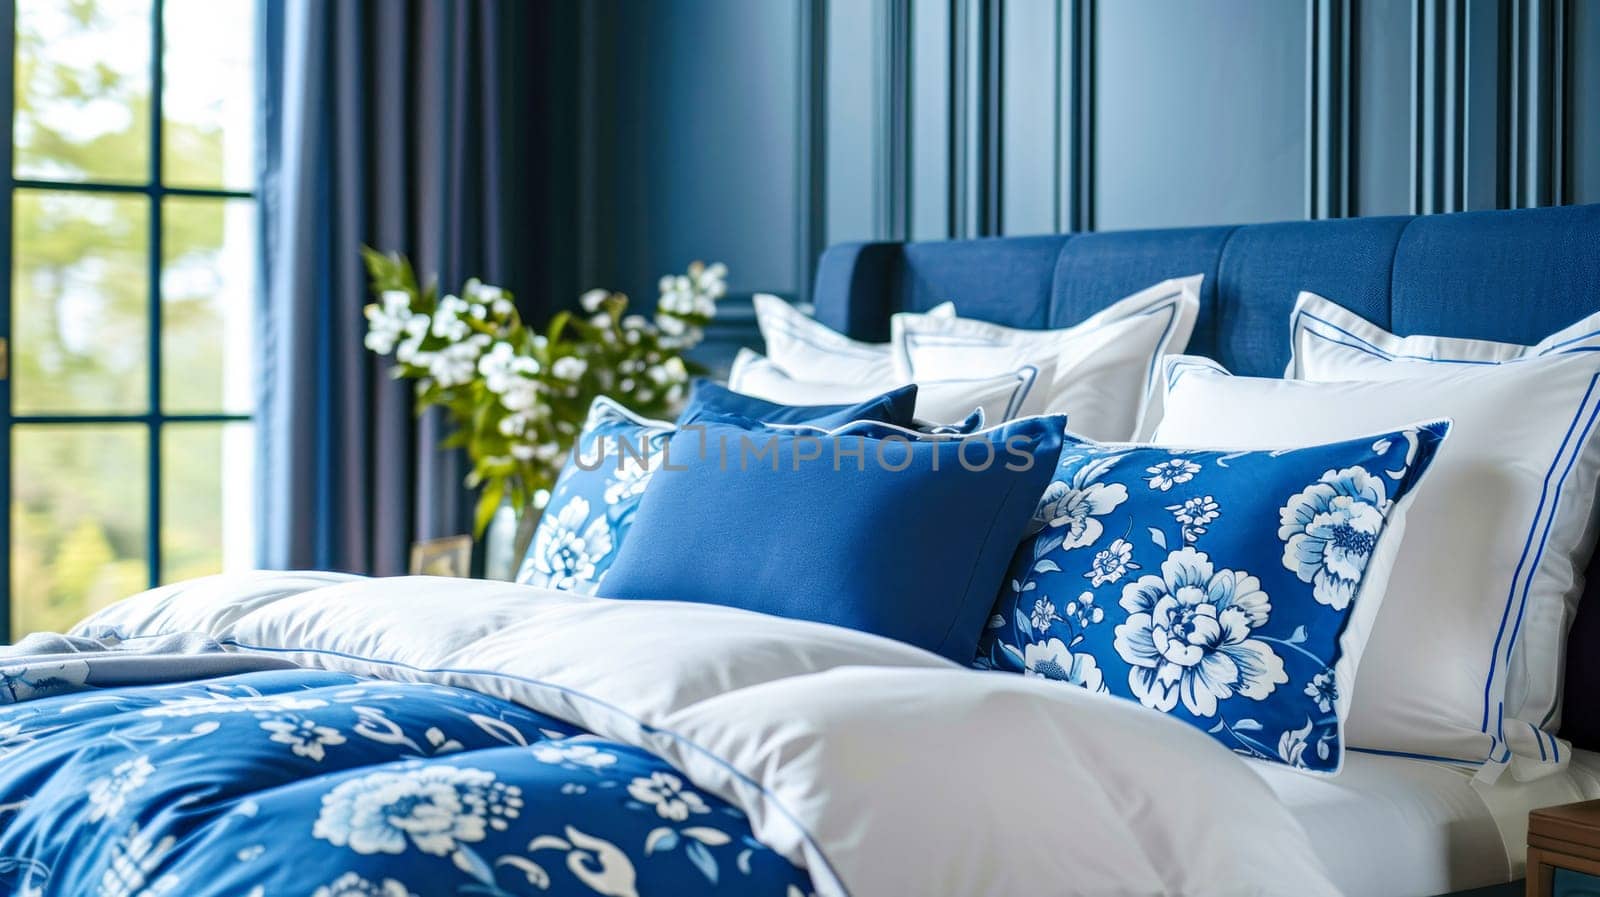 Bed with blue and white pillows and bedspreads. Interior design of a modern bedroom.